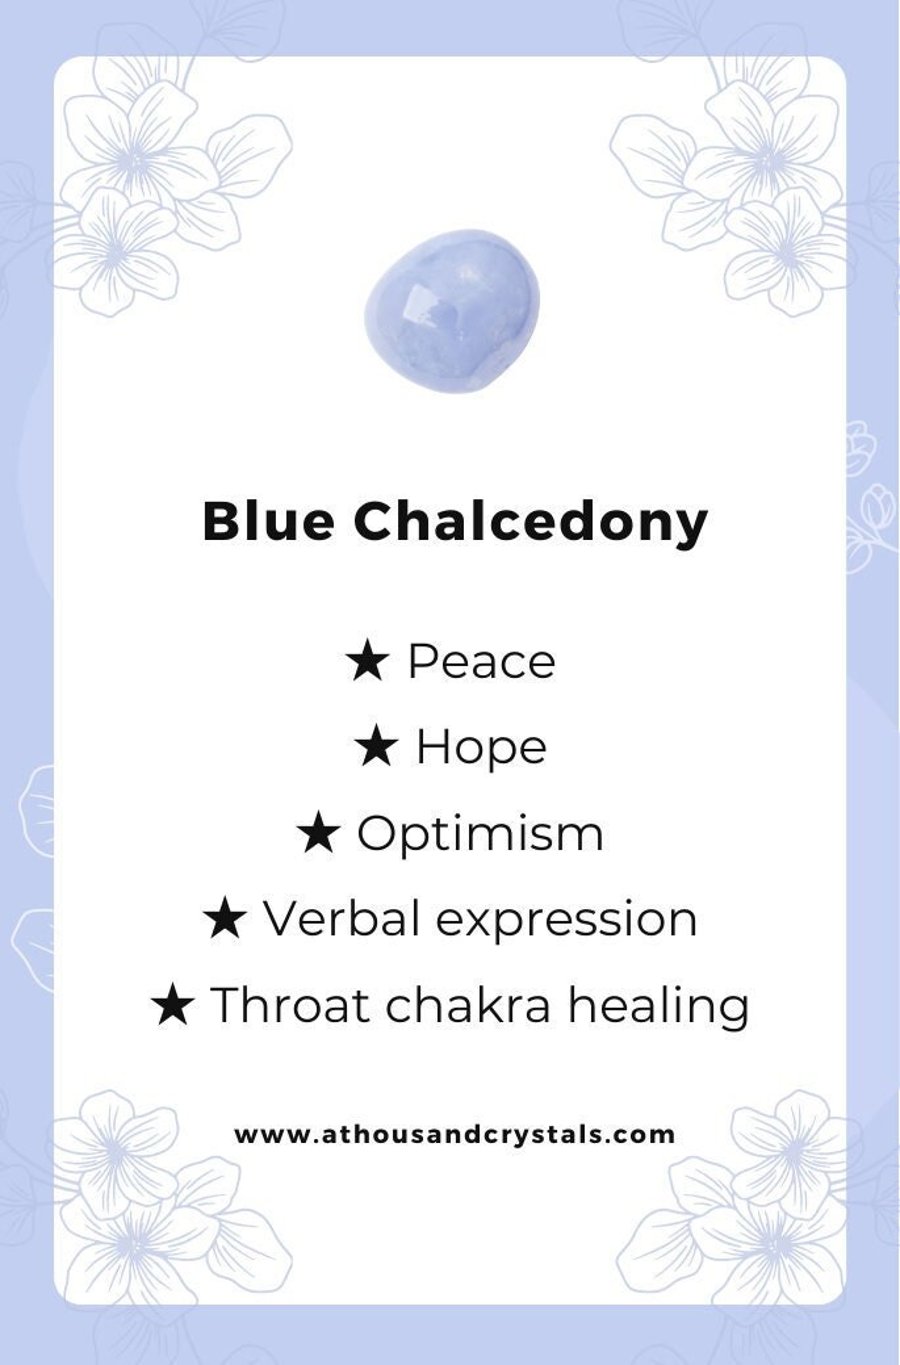 BLUE CHALCEDONY, Tumbled Stone, Loose, Gemstone, Healing Crystals and Stones,